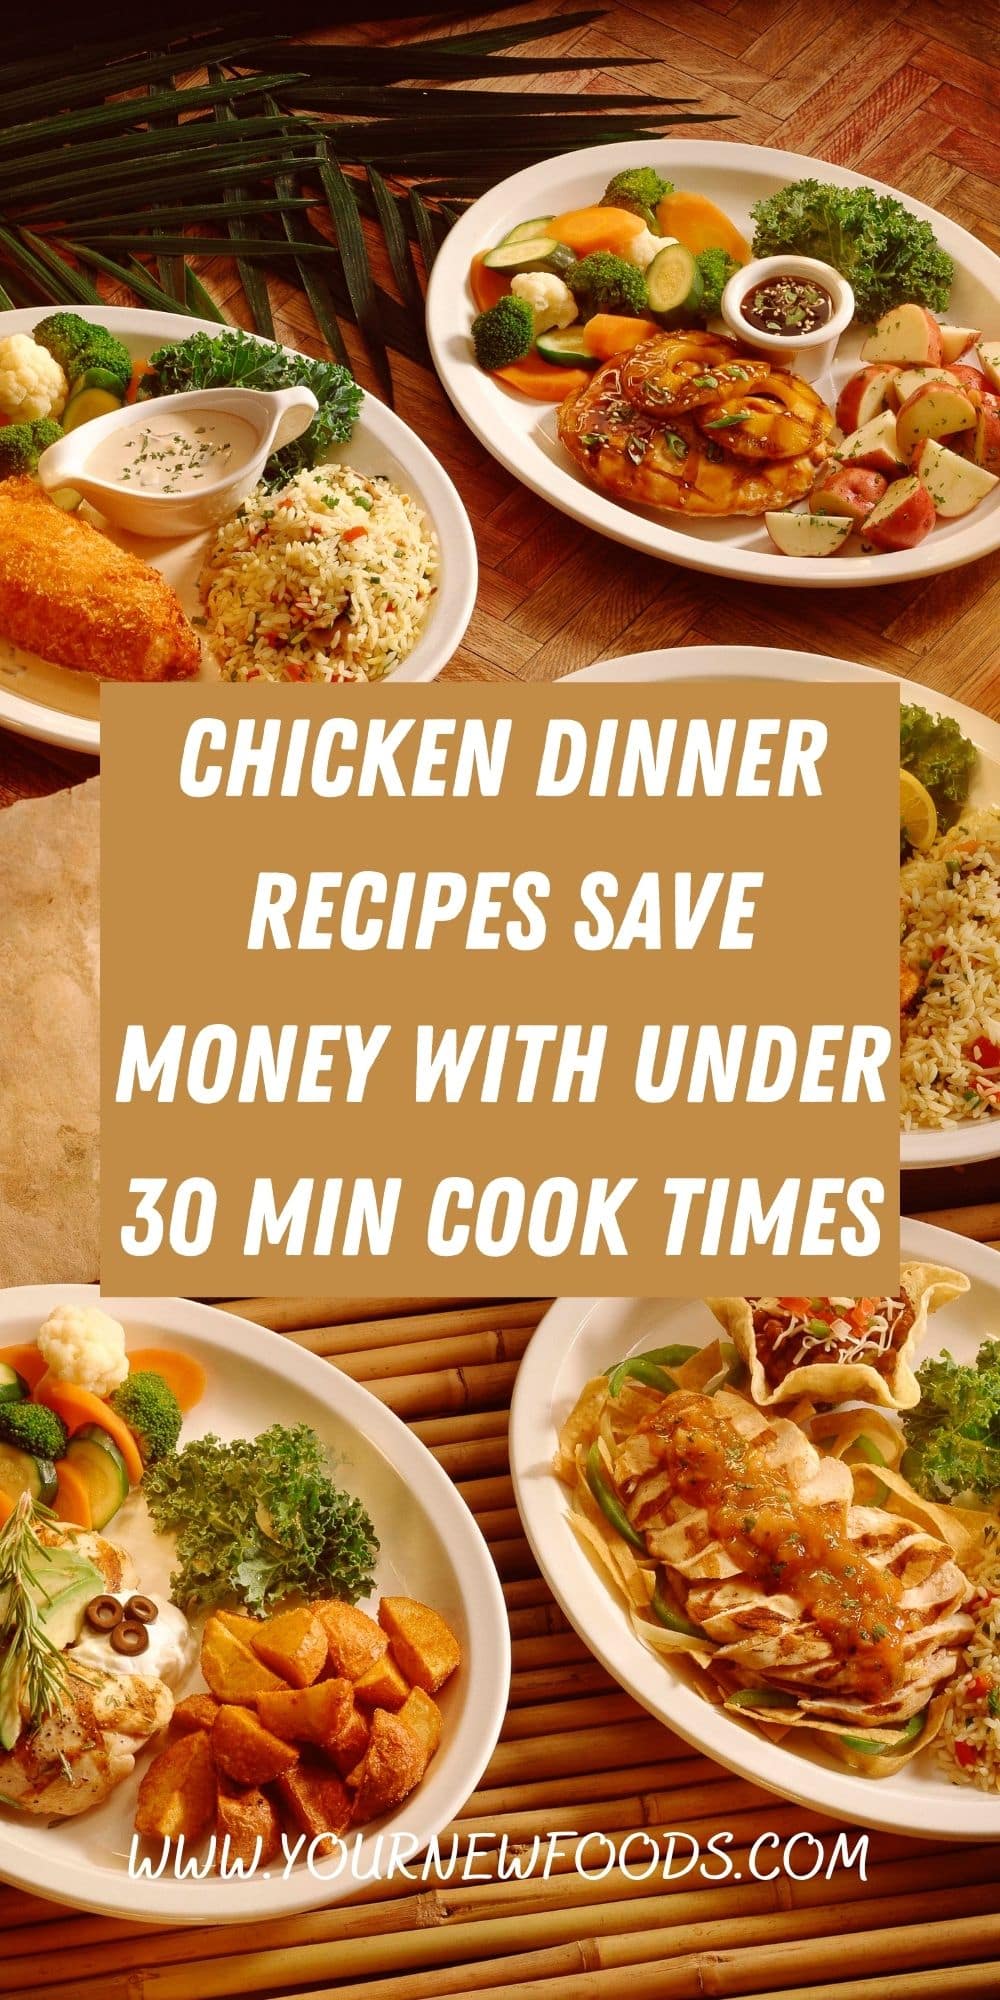 Delicious chicken dinner recipes under 30 min cook time